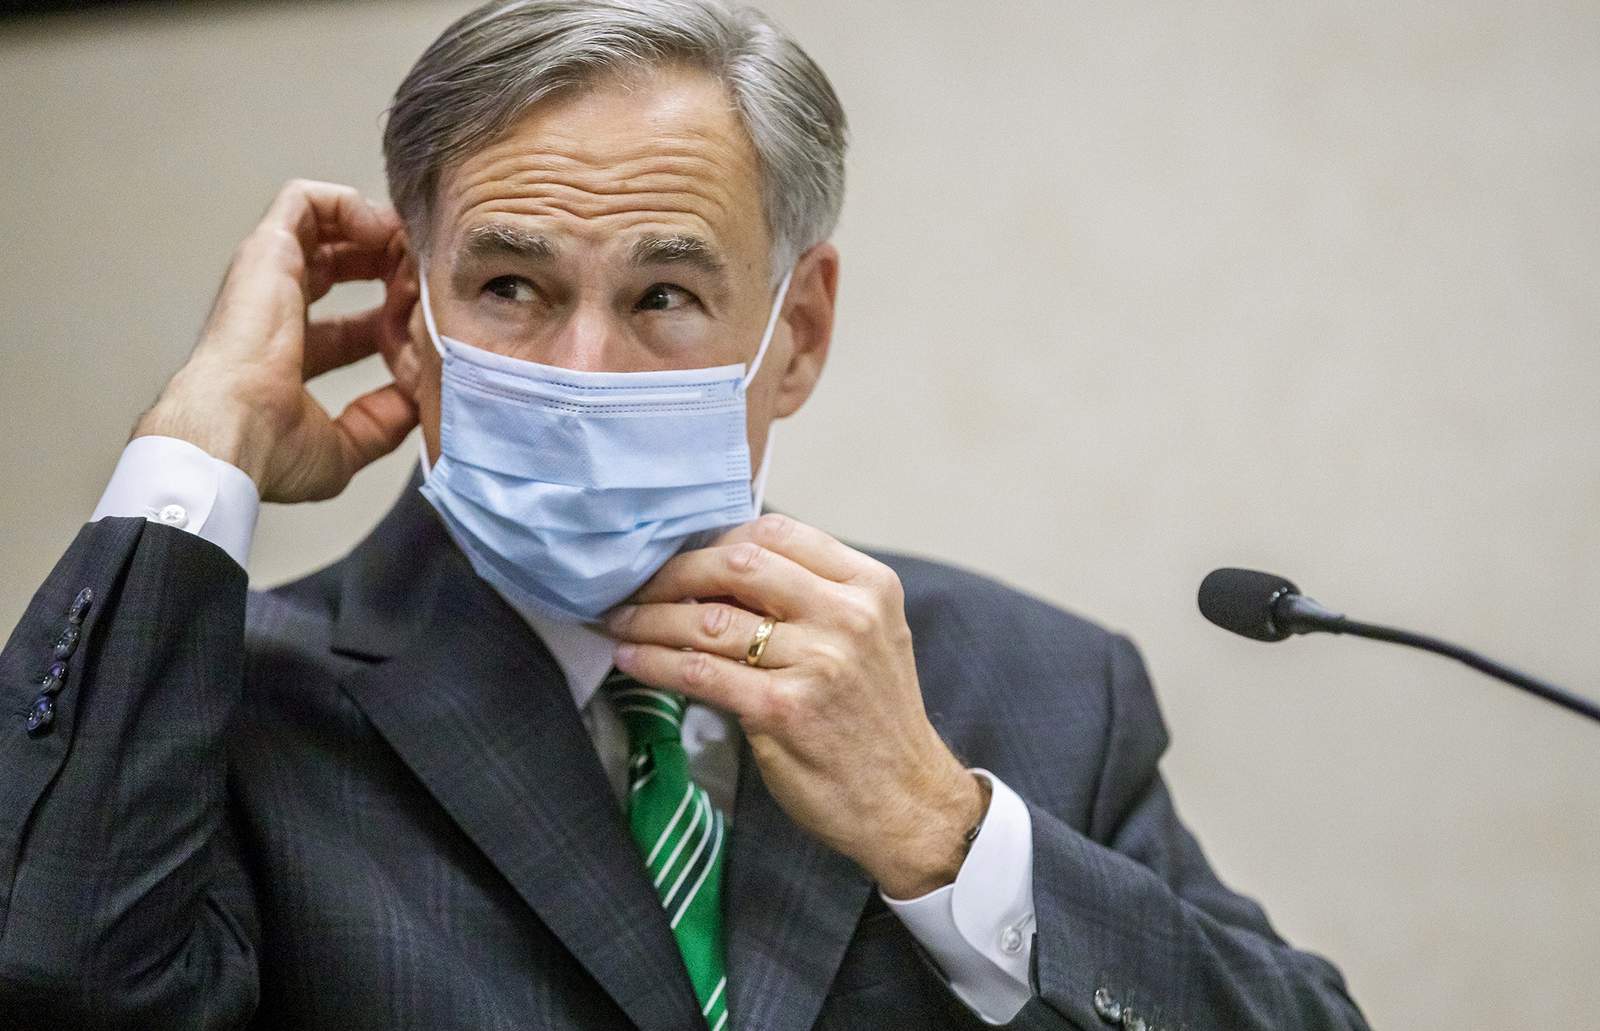 CORRECTS CITY TO AUSTIN, INSTEAD OF HOUSTON Texas Gov. Greg Abbott adjusts his mask after giving an update on the categories of medical surge facilities and how it effects Level 5 of maintaining staffed beds during a press conference at Texas Department of Public Safety, Tuesday, June 16, 2020, in Austin, Texas. (Ricardo B. Brazziell/Austin American-Statesman via AP)